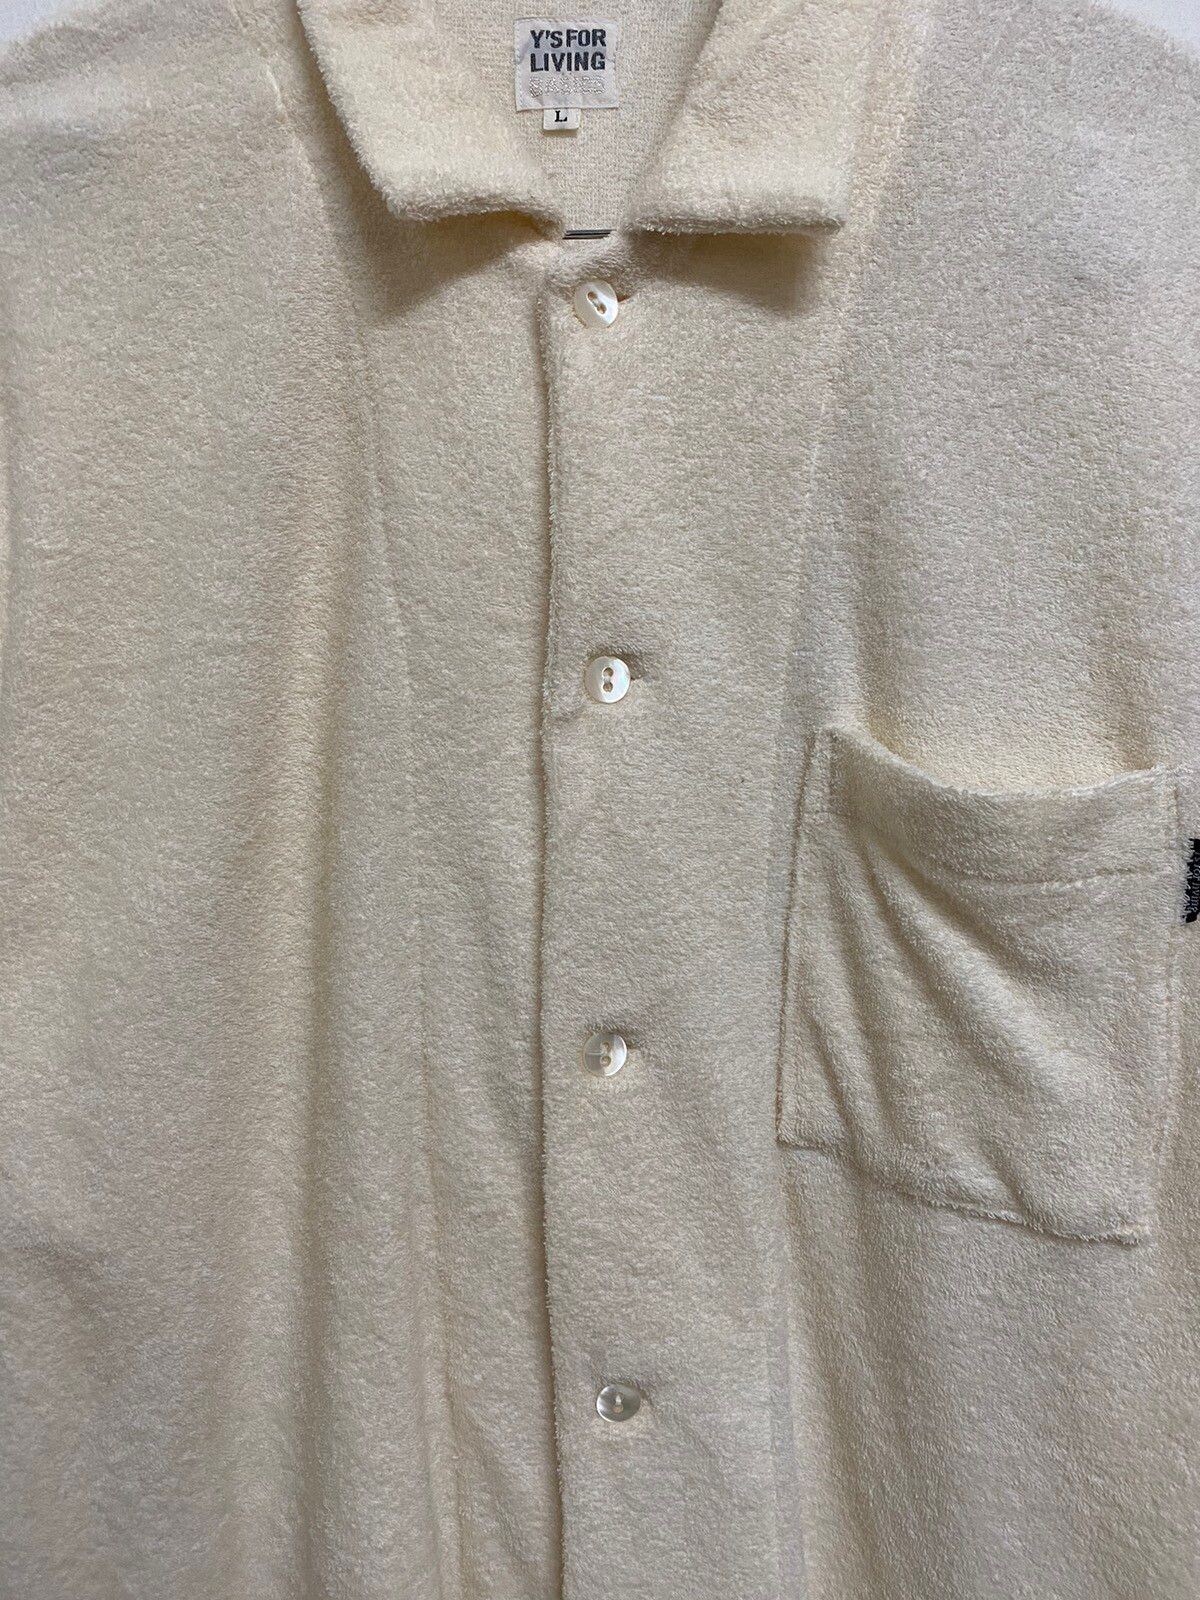 Y's For Living Yohji Yamamoto Button Up Japan Made - 2